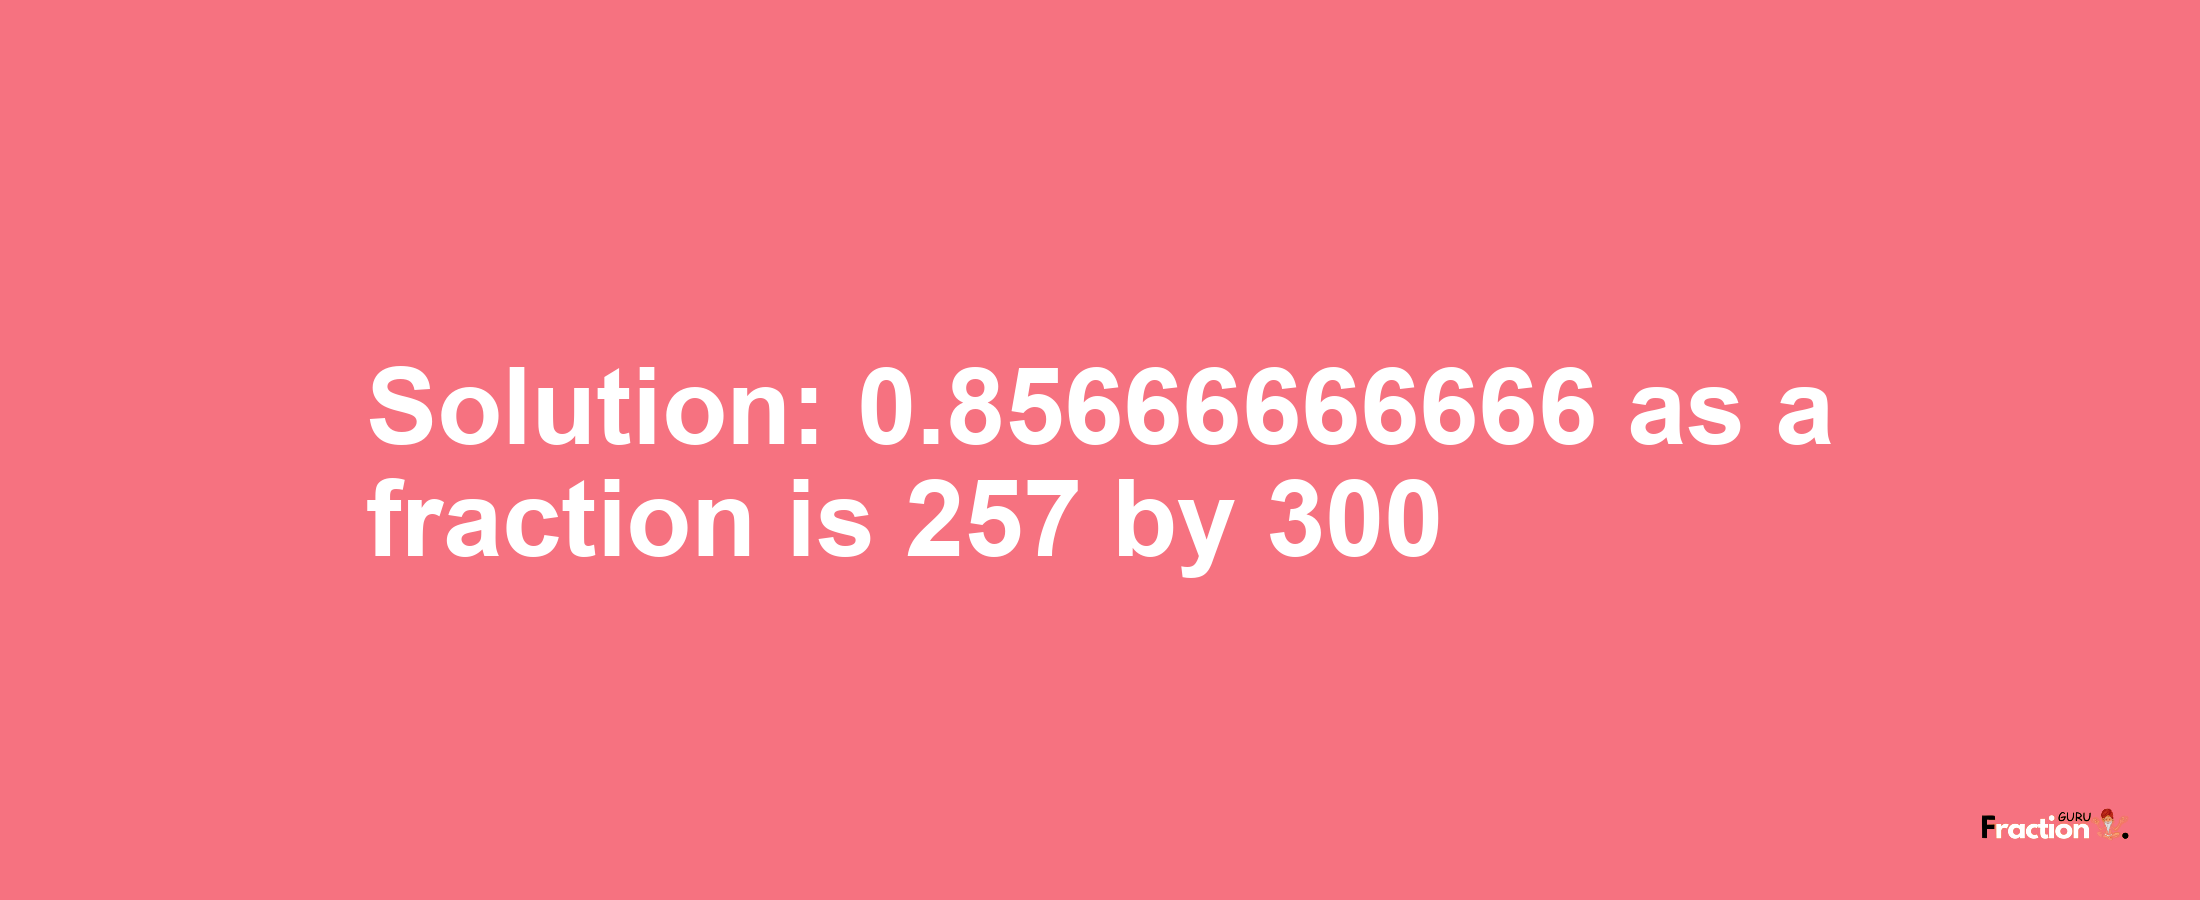 Solution:0.85666666666 as a fraction is 257/300